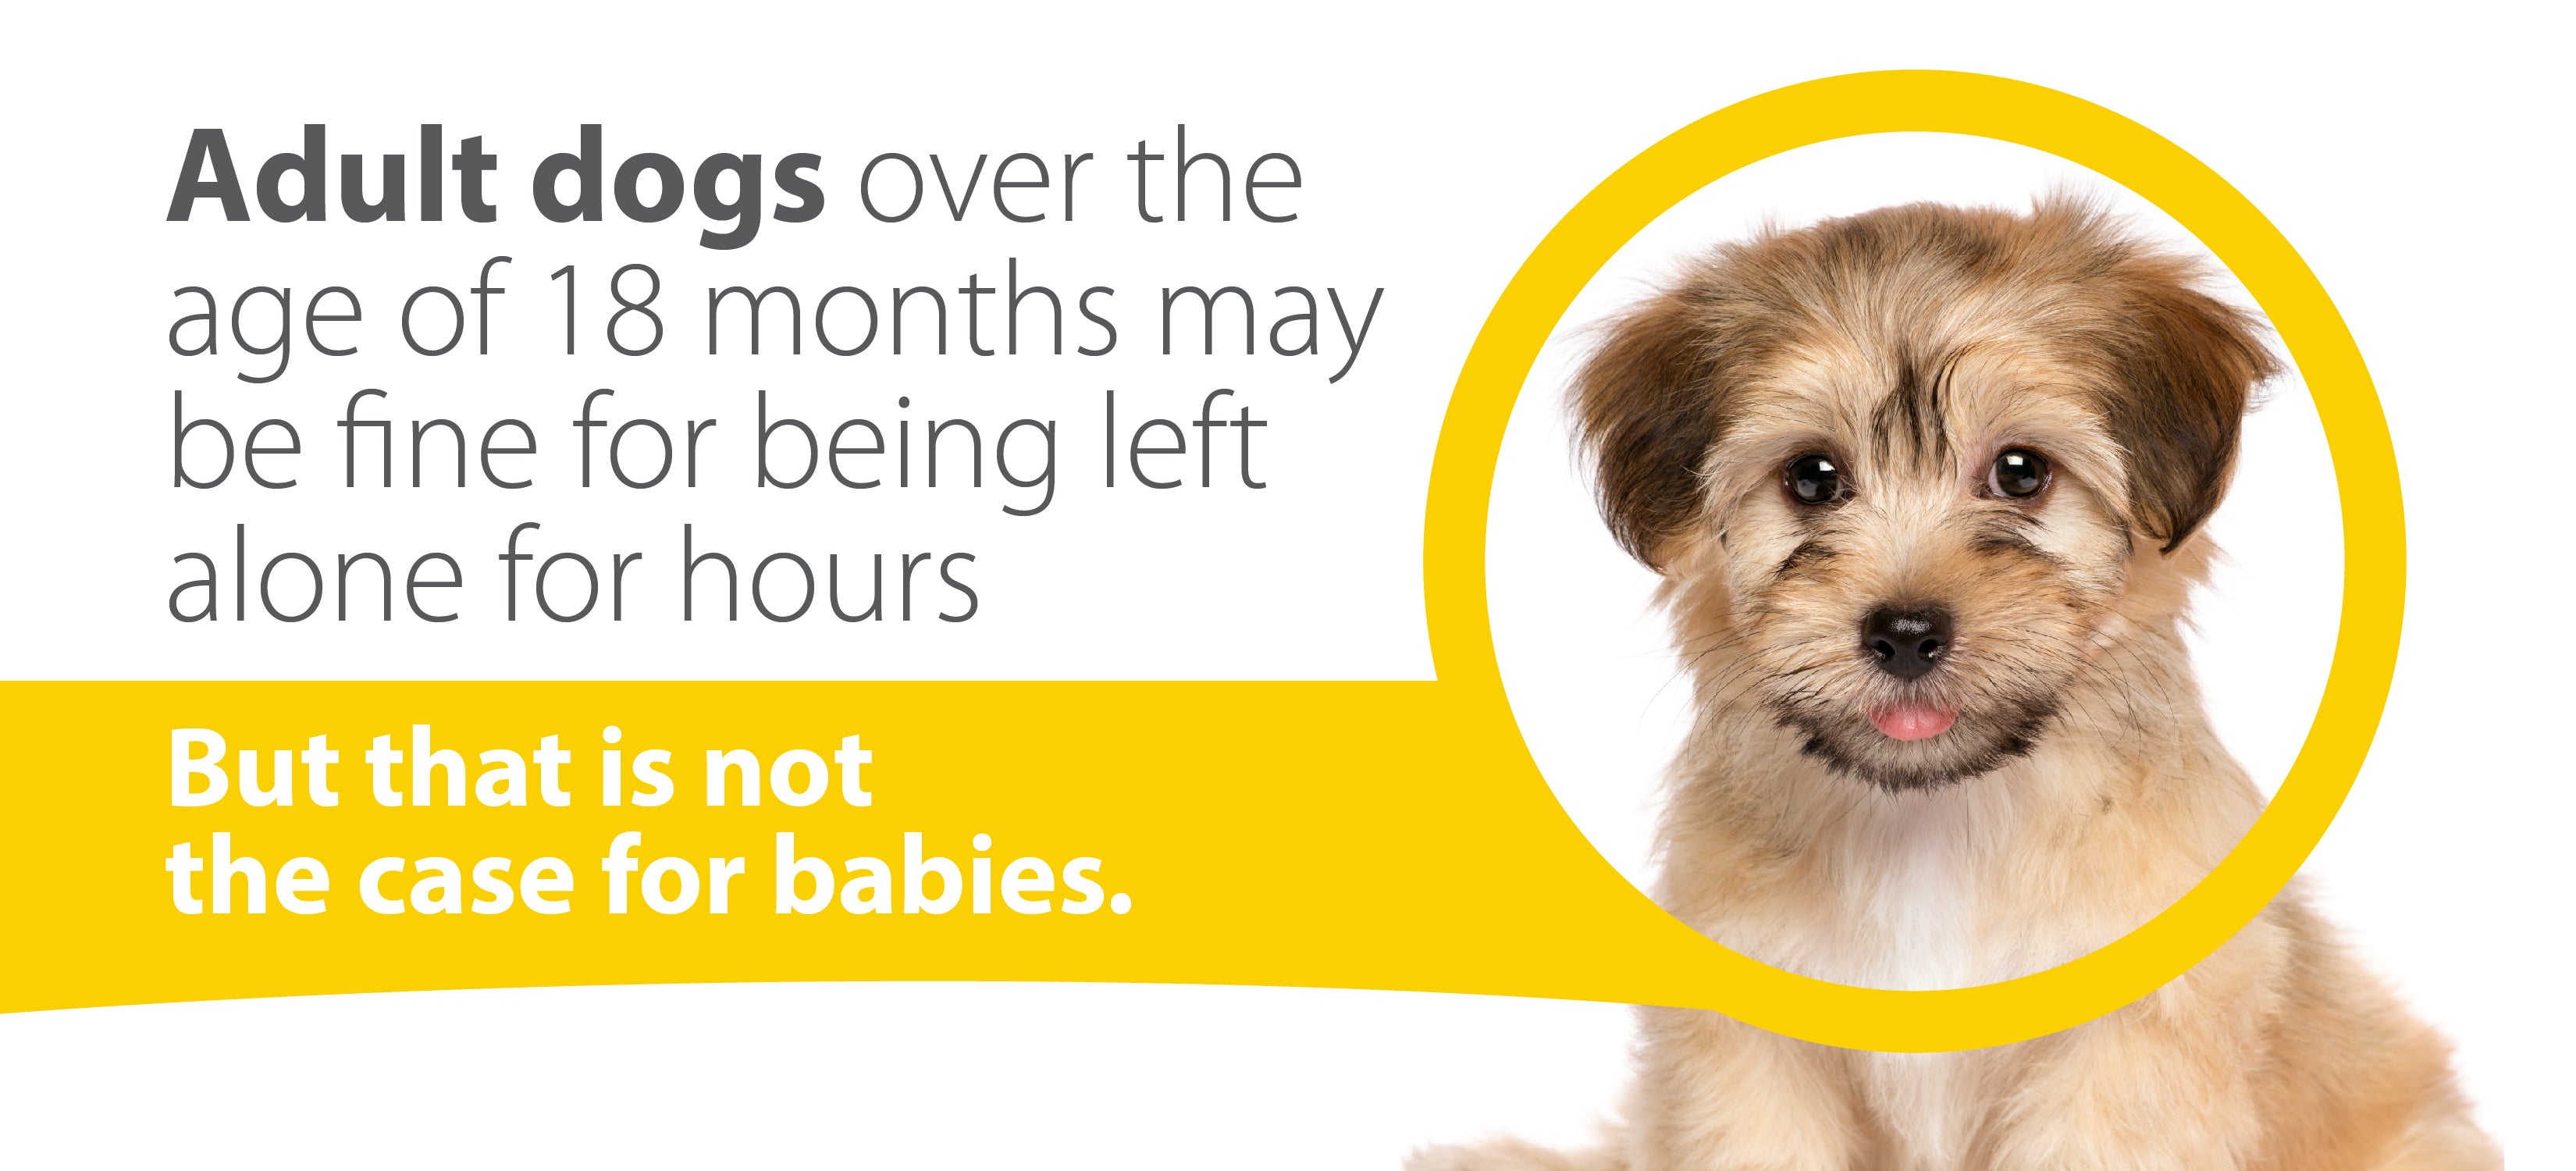 adult dogs over 18 months are fine for being left alone for hours